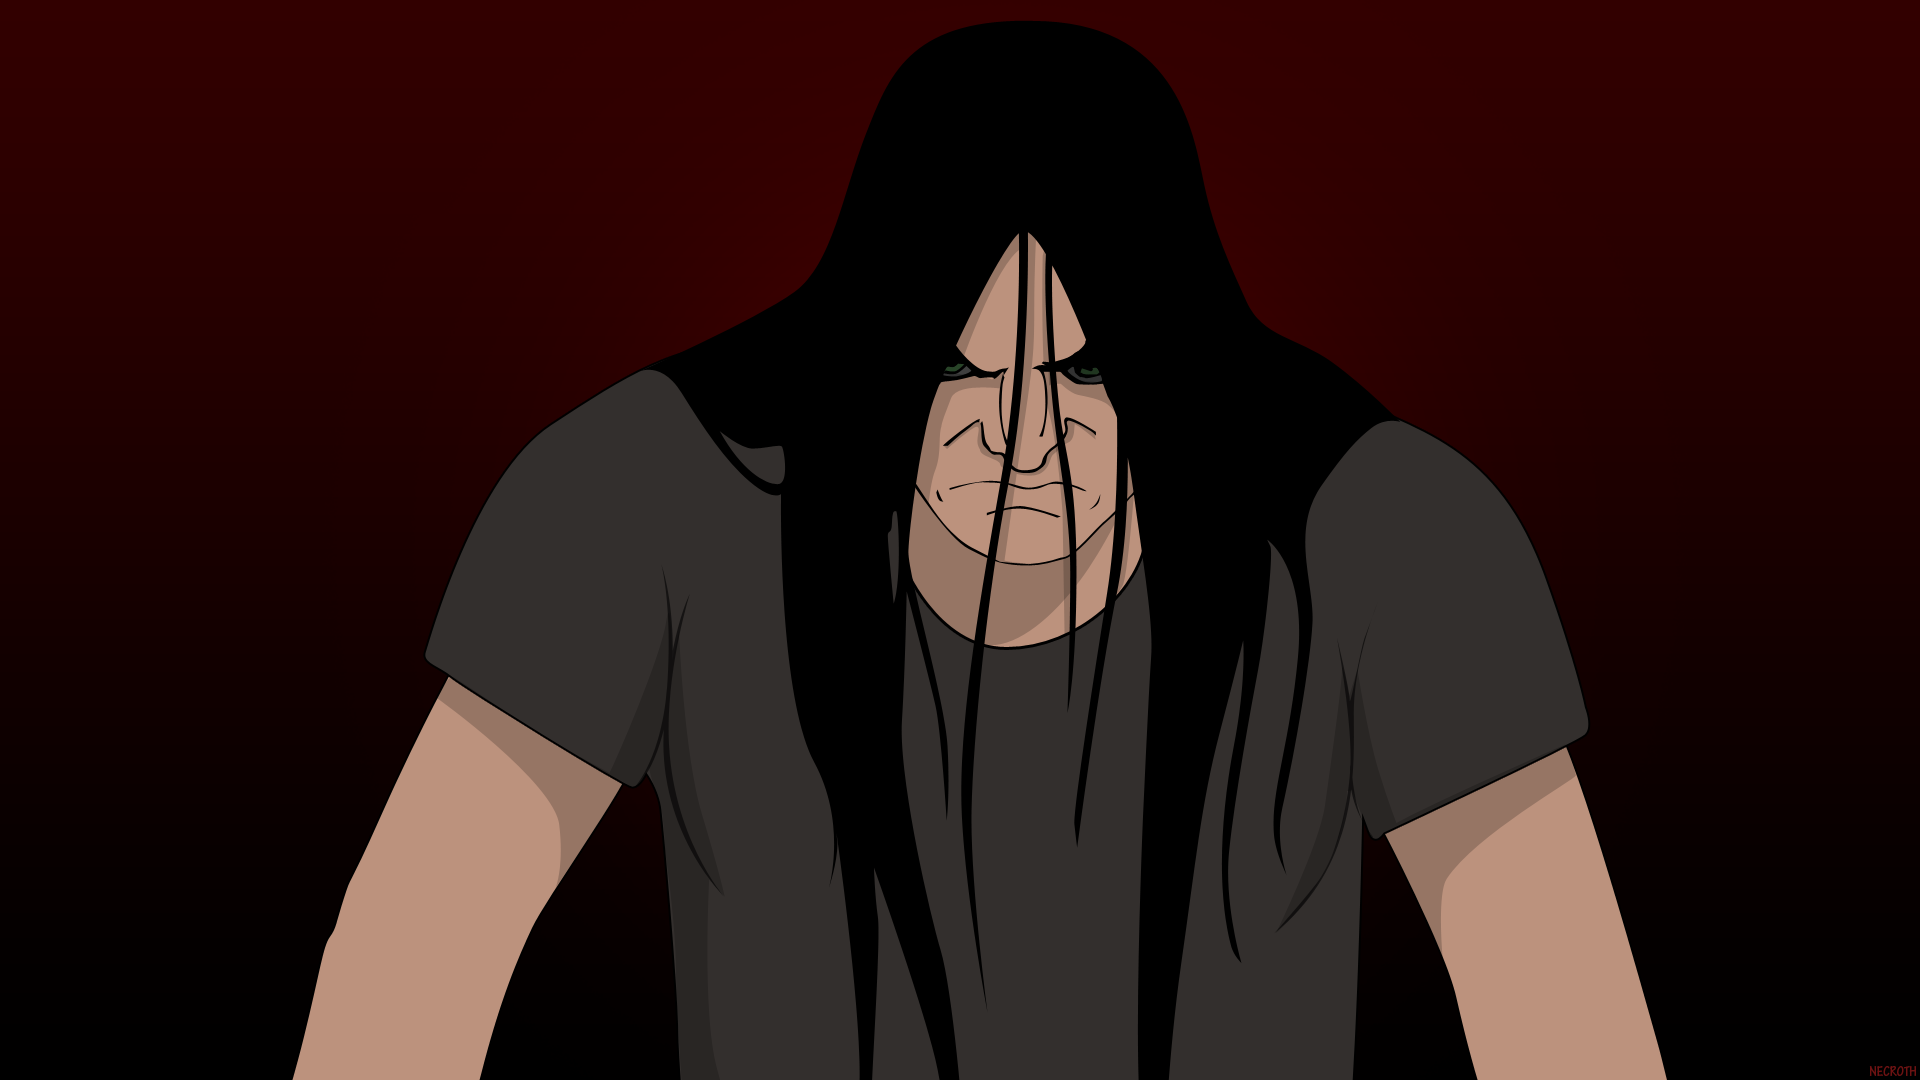 dethklok_by_necrothic-d4c5zn6.png